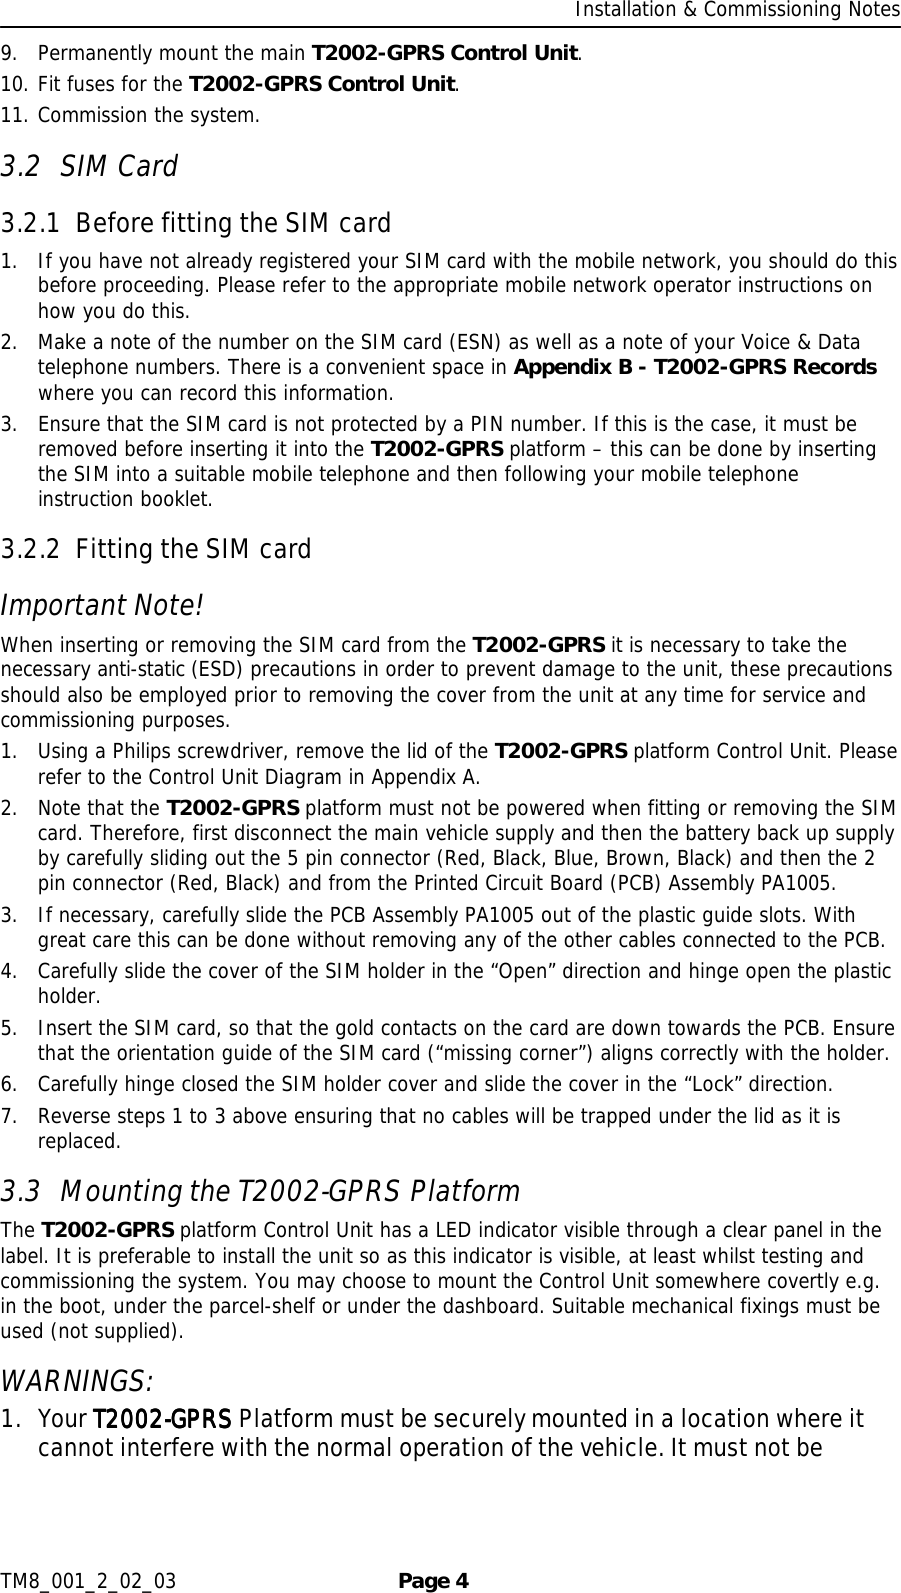     Installation &amp; Commissioning Notes TM8_001_2_02_03  Page 4 9. Permanently mount the main T2002-GPRS Control Unit.  10. Fit fuses for the T2002-GPRS Control Unit. 11. Commission the system. 3.2 SIM Card 3.2.1 Before fitting the SIM card 1. If you have not already registered your SIM card with the mobile network, you should do this before proceeding. Please refer to the appropriate mobile network operator instructions on how you do this. 2. Make a note of the number on the SIM card (ESN) as well as a note of your Voice &amp; Data telephone numbers. There is a convenient space in Appendix B - T2002-GPRS Records where you can record this information.  3. Ensure that the SIM card is not protected by a PIN number. If this is the case, it must be removed before inserting it into the T2002-GPRS platform – this can be done by inserting the SIM into a suitable mobile telephone and then following your mobile telephone instruction booklet.  3.2.2 Fitting the SIM card Important Note! When inserting or removing the SIM card from the T2002-GPRS it is necessary to take the necessary anti-static (ESD) precautions in order to prevent damage to the unit, these precautions should also be employed prior to removing the cover from the unit at any time for service and commissioning purposes. 1. Using a Philips screwdriver, remove the lid of the T2002-GPRS platform Control Unit. Please refer to the Control Unit Diagram in Appendix A. 2. Note that the T2002-GPRS platform must not be powered when fitting or removing the SIM card. Therefore, first disconnect the main vehicle supply and then the battery back up supply by carefully sliding out the 5 pin connector (Red, Black, Blue, Brown, Black) and then the 2 pin connector (Red, Black) and from the Printed Circuit Board (PCB) Assembly PA1005. 3. If necessary, carefully slide the PCB Assembly PA1005 out of the plastic guide slots. With great care this can be done without removing any of the other cables connected to the PCB. 4. Carefully slide the cover of the SIM holder in the “Open” direction and hinge open the plastic holder. 5. Insert the SIM card, so that the gold contacts on the card are down towards the PCB. Ensure that the orientation guide of the SIM card (“missing corner”) aligns correctly with the holder. 6. Carefully hinge closed the SIM holder cover and slide the cover in the “Lock” direction. 7. Reverse steps 1 to 3 above ensuring that no cables will be trapped under the lid as it is replaced. 3.3 Mounting the T2002-GPRS Platform The T2002-GPRS platform Control Unit has a LED indicator visible through a clear panel in the label. It is preferable to install the unit so as this indicator is visible, at least whilst testing and commissioning the system. You may choose to mount the Control Unit somewhere covertly e.g. in the boot, under the parcel-shelf or under the dashboard. Suitable mechanical fixings must be used (not supplied). WARNINGS:  1. Your T2002T2002T2002T2002----GPRS GPRS GPRS GPRS Platform must be securely mounted in a location where it cannot interfere with the normal operation of the vehicle. It must not be 